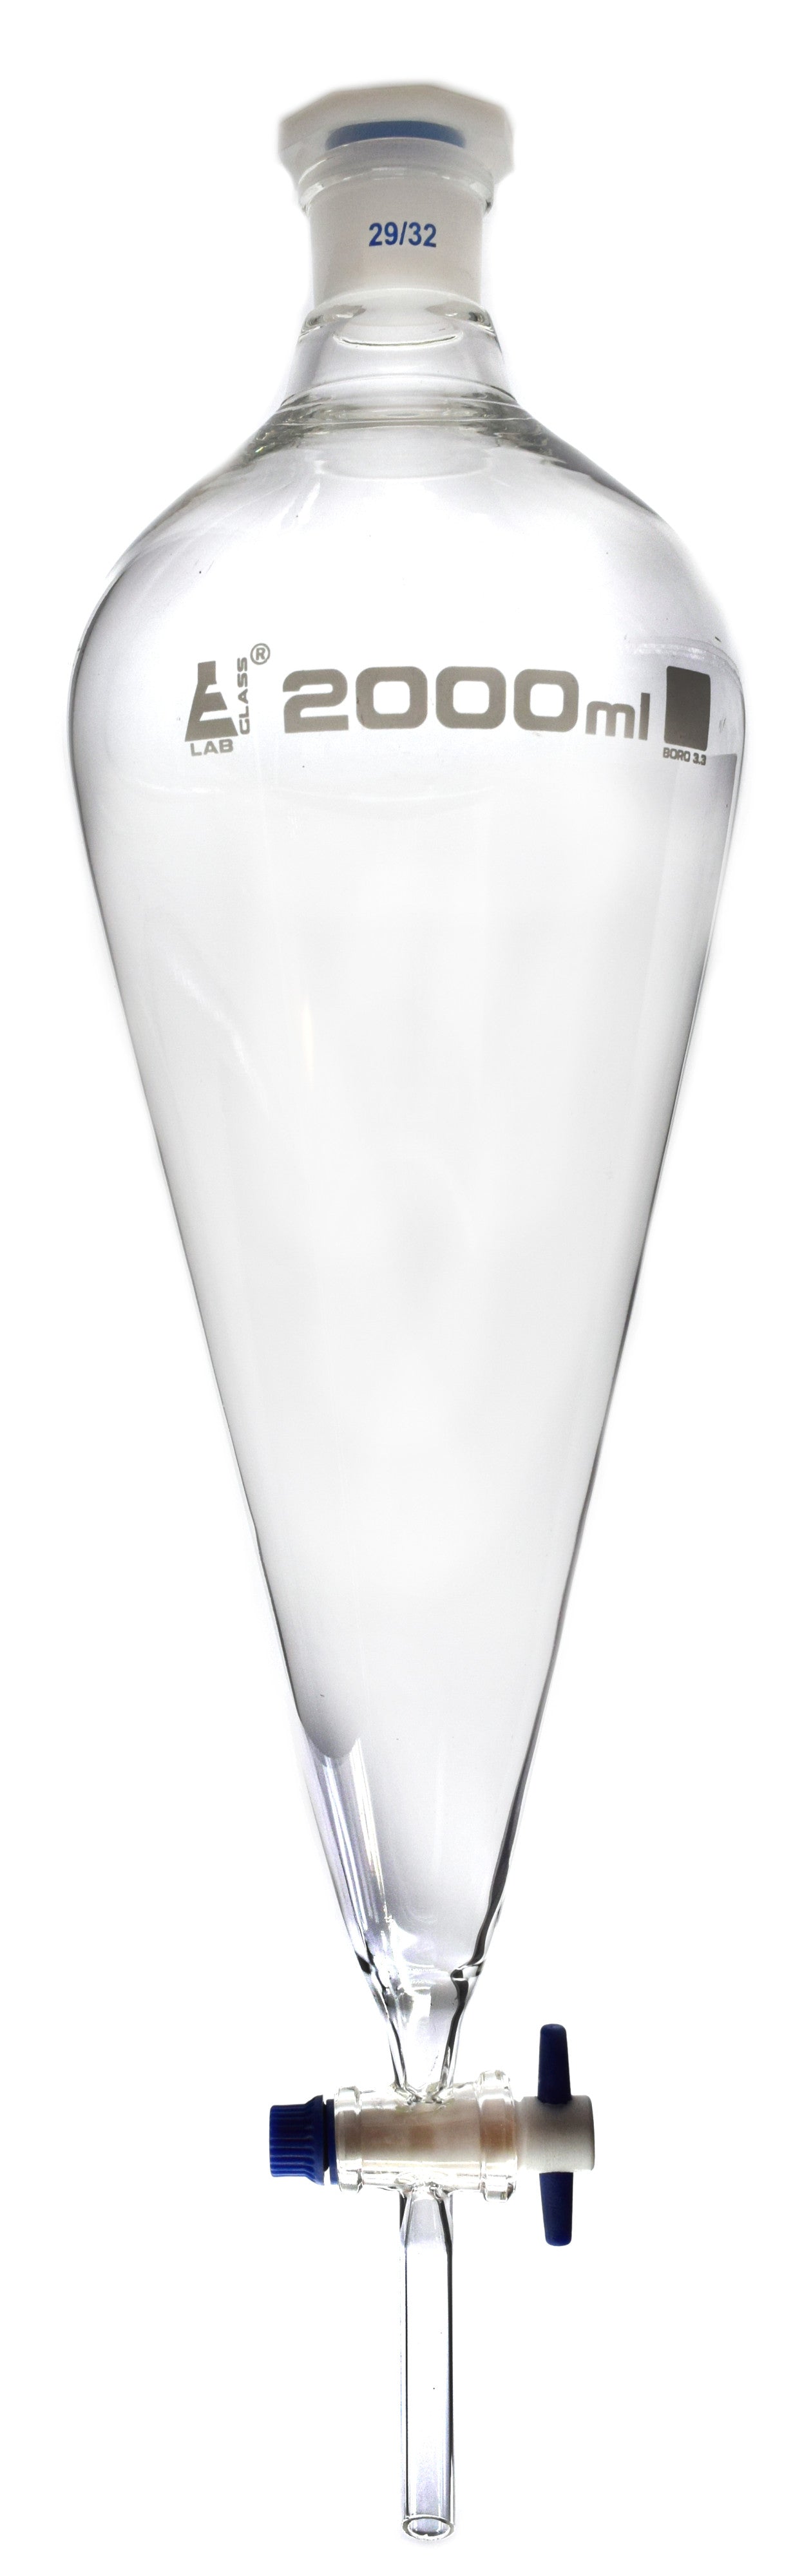 Glass Squibb Separatory Funnel with PTFE Key Stopcock and Interchangeable Polypropylene Stopper, 2,000 ml, Autoclavable